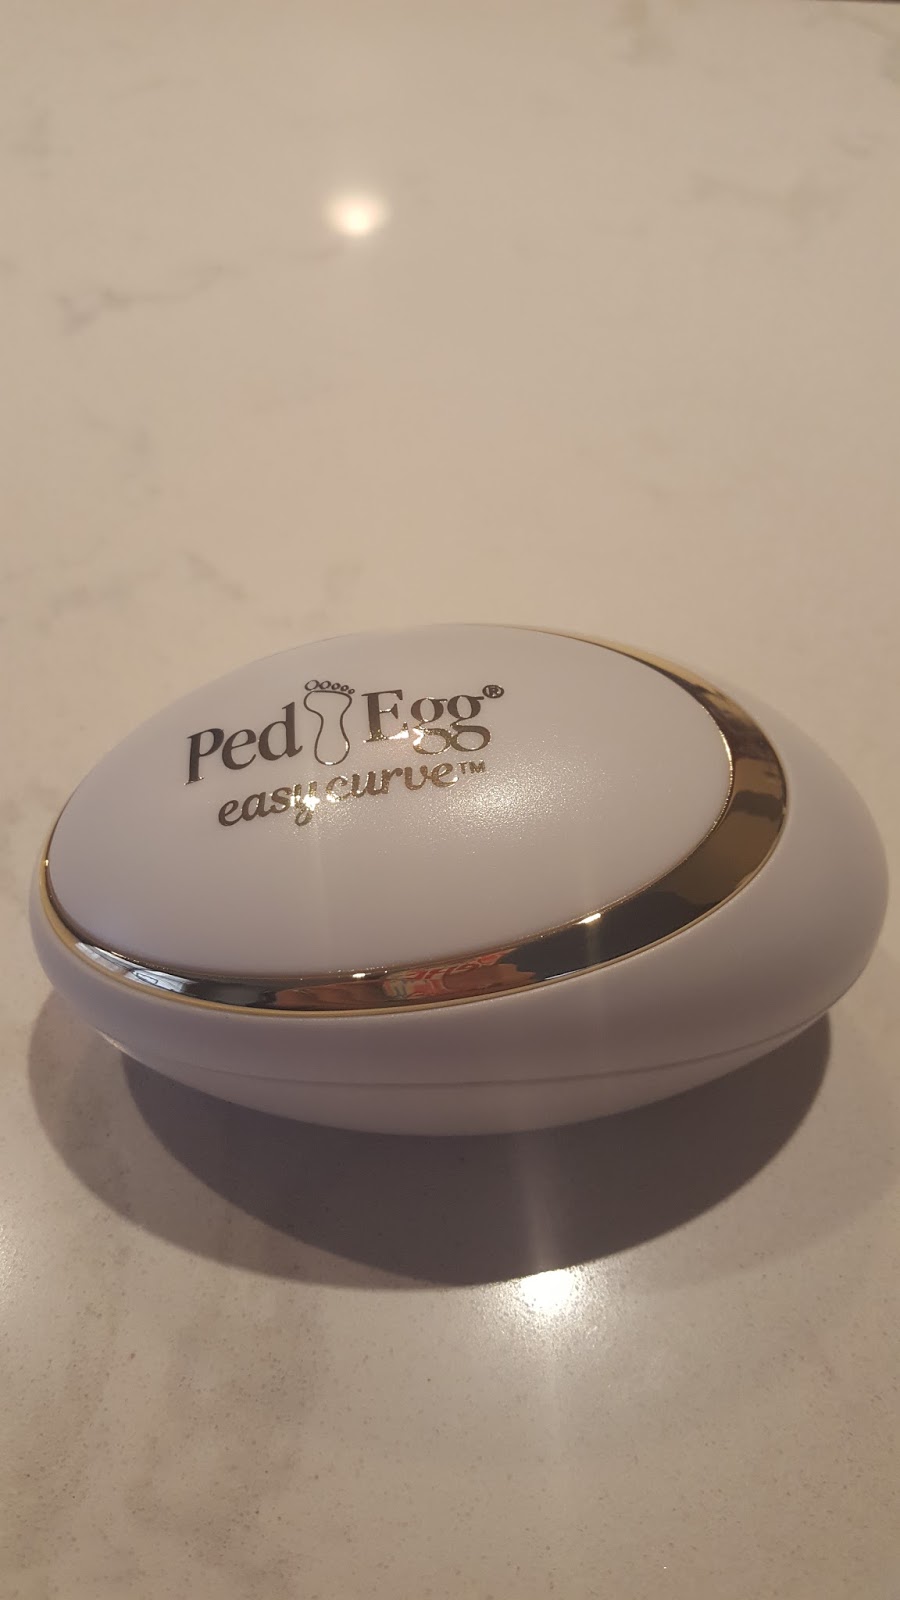 Ped Egg Easy Curve Foot File